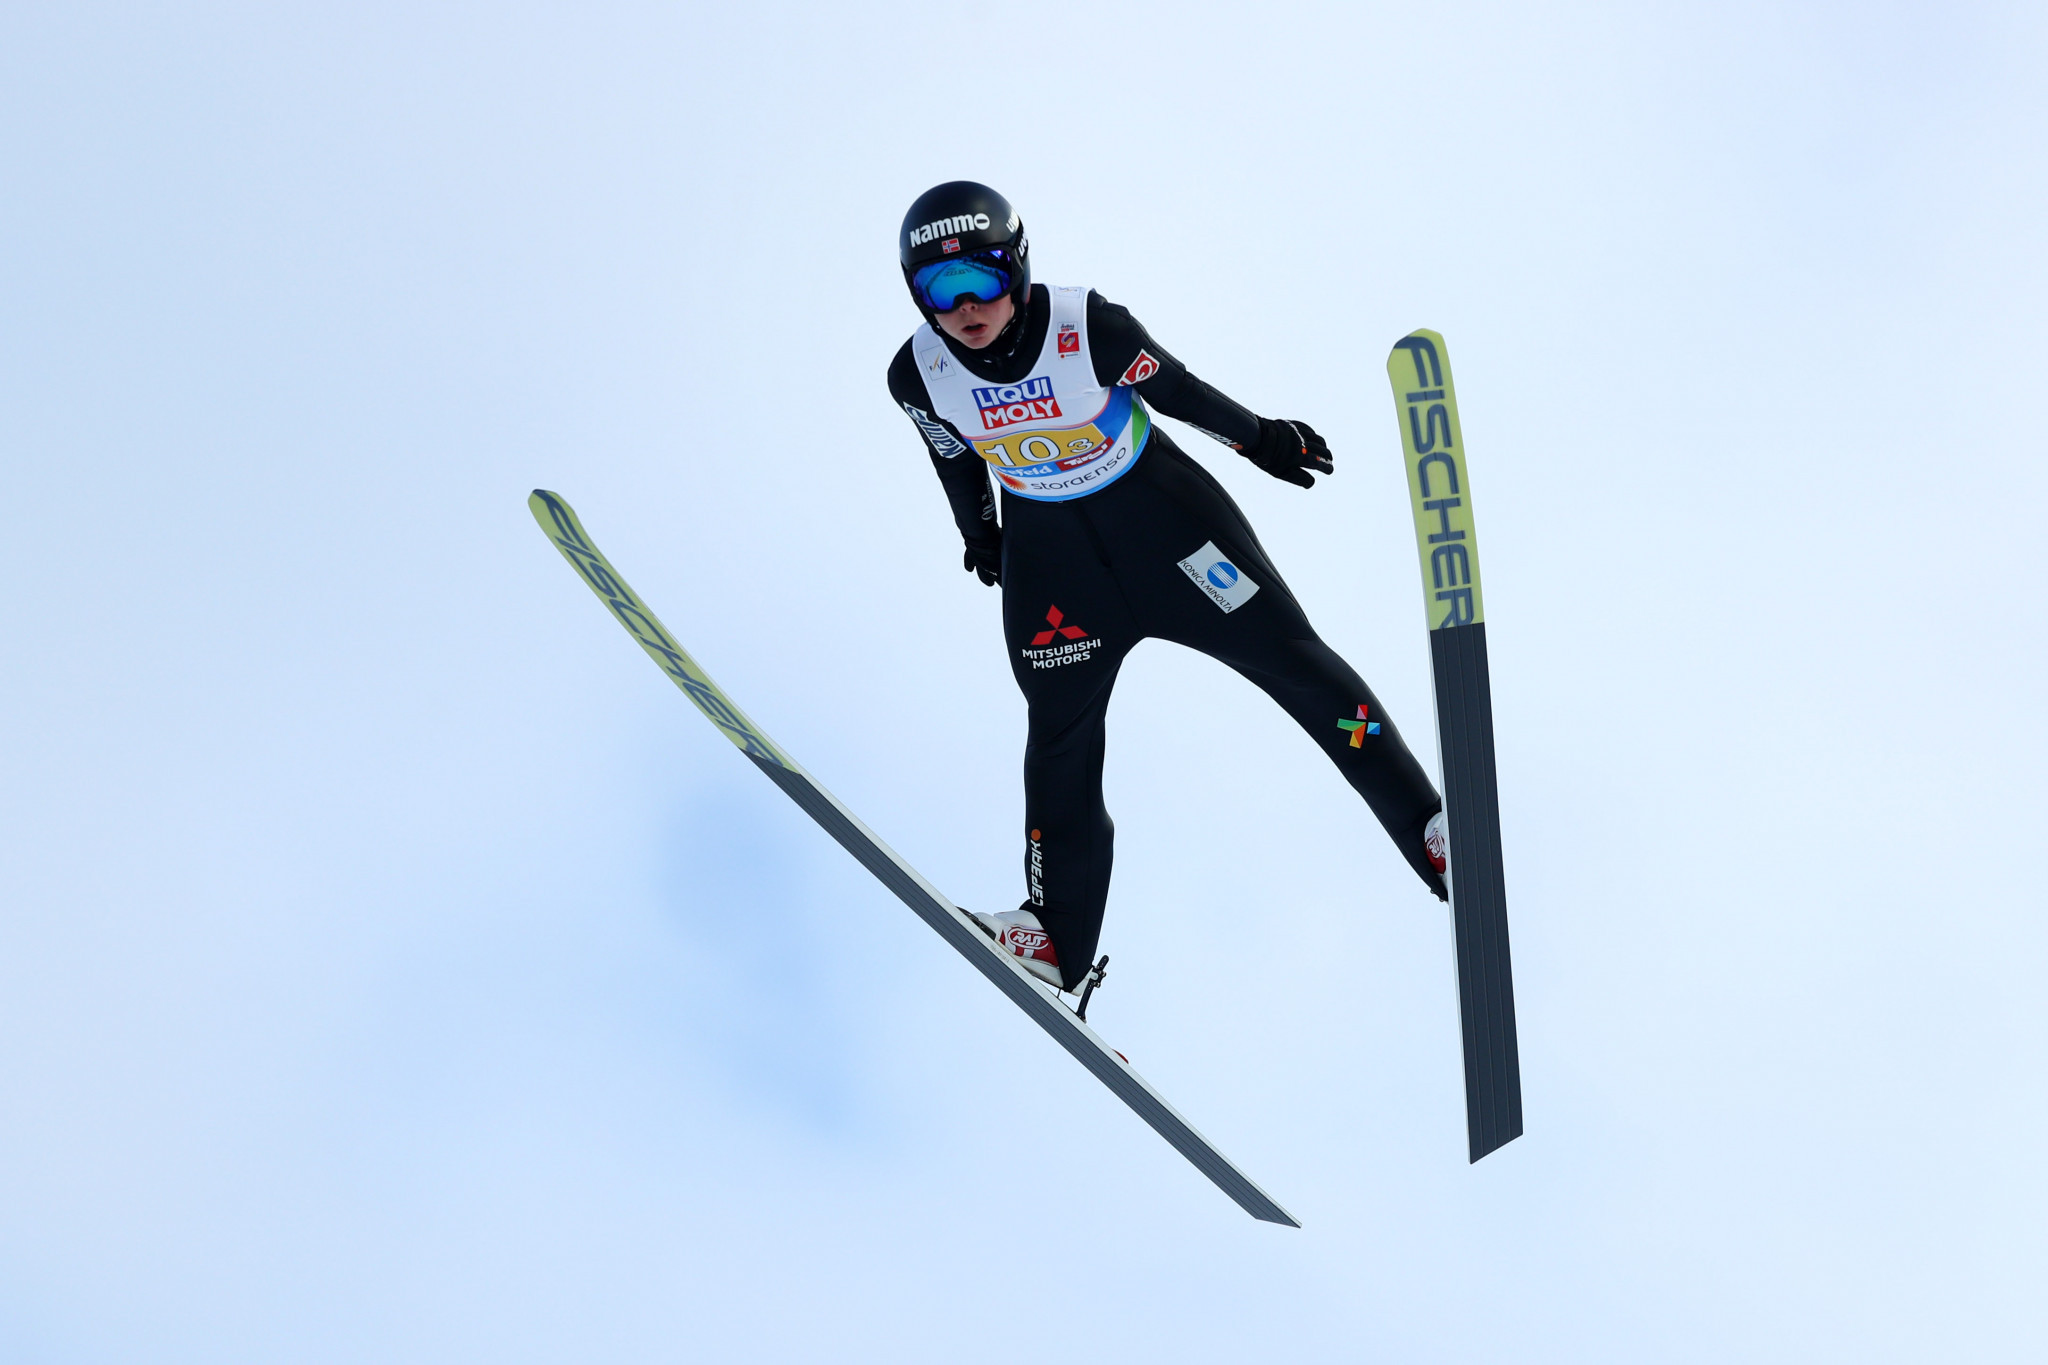 Norway's Olympic champion Lundby wins Ski Jump World Cup opener at home arena